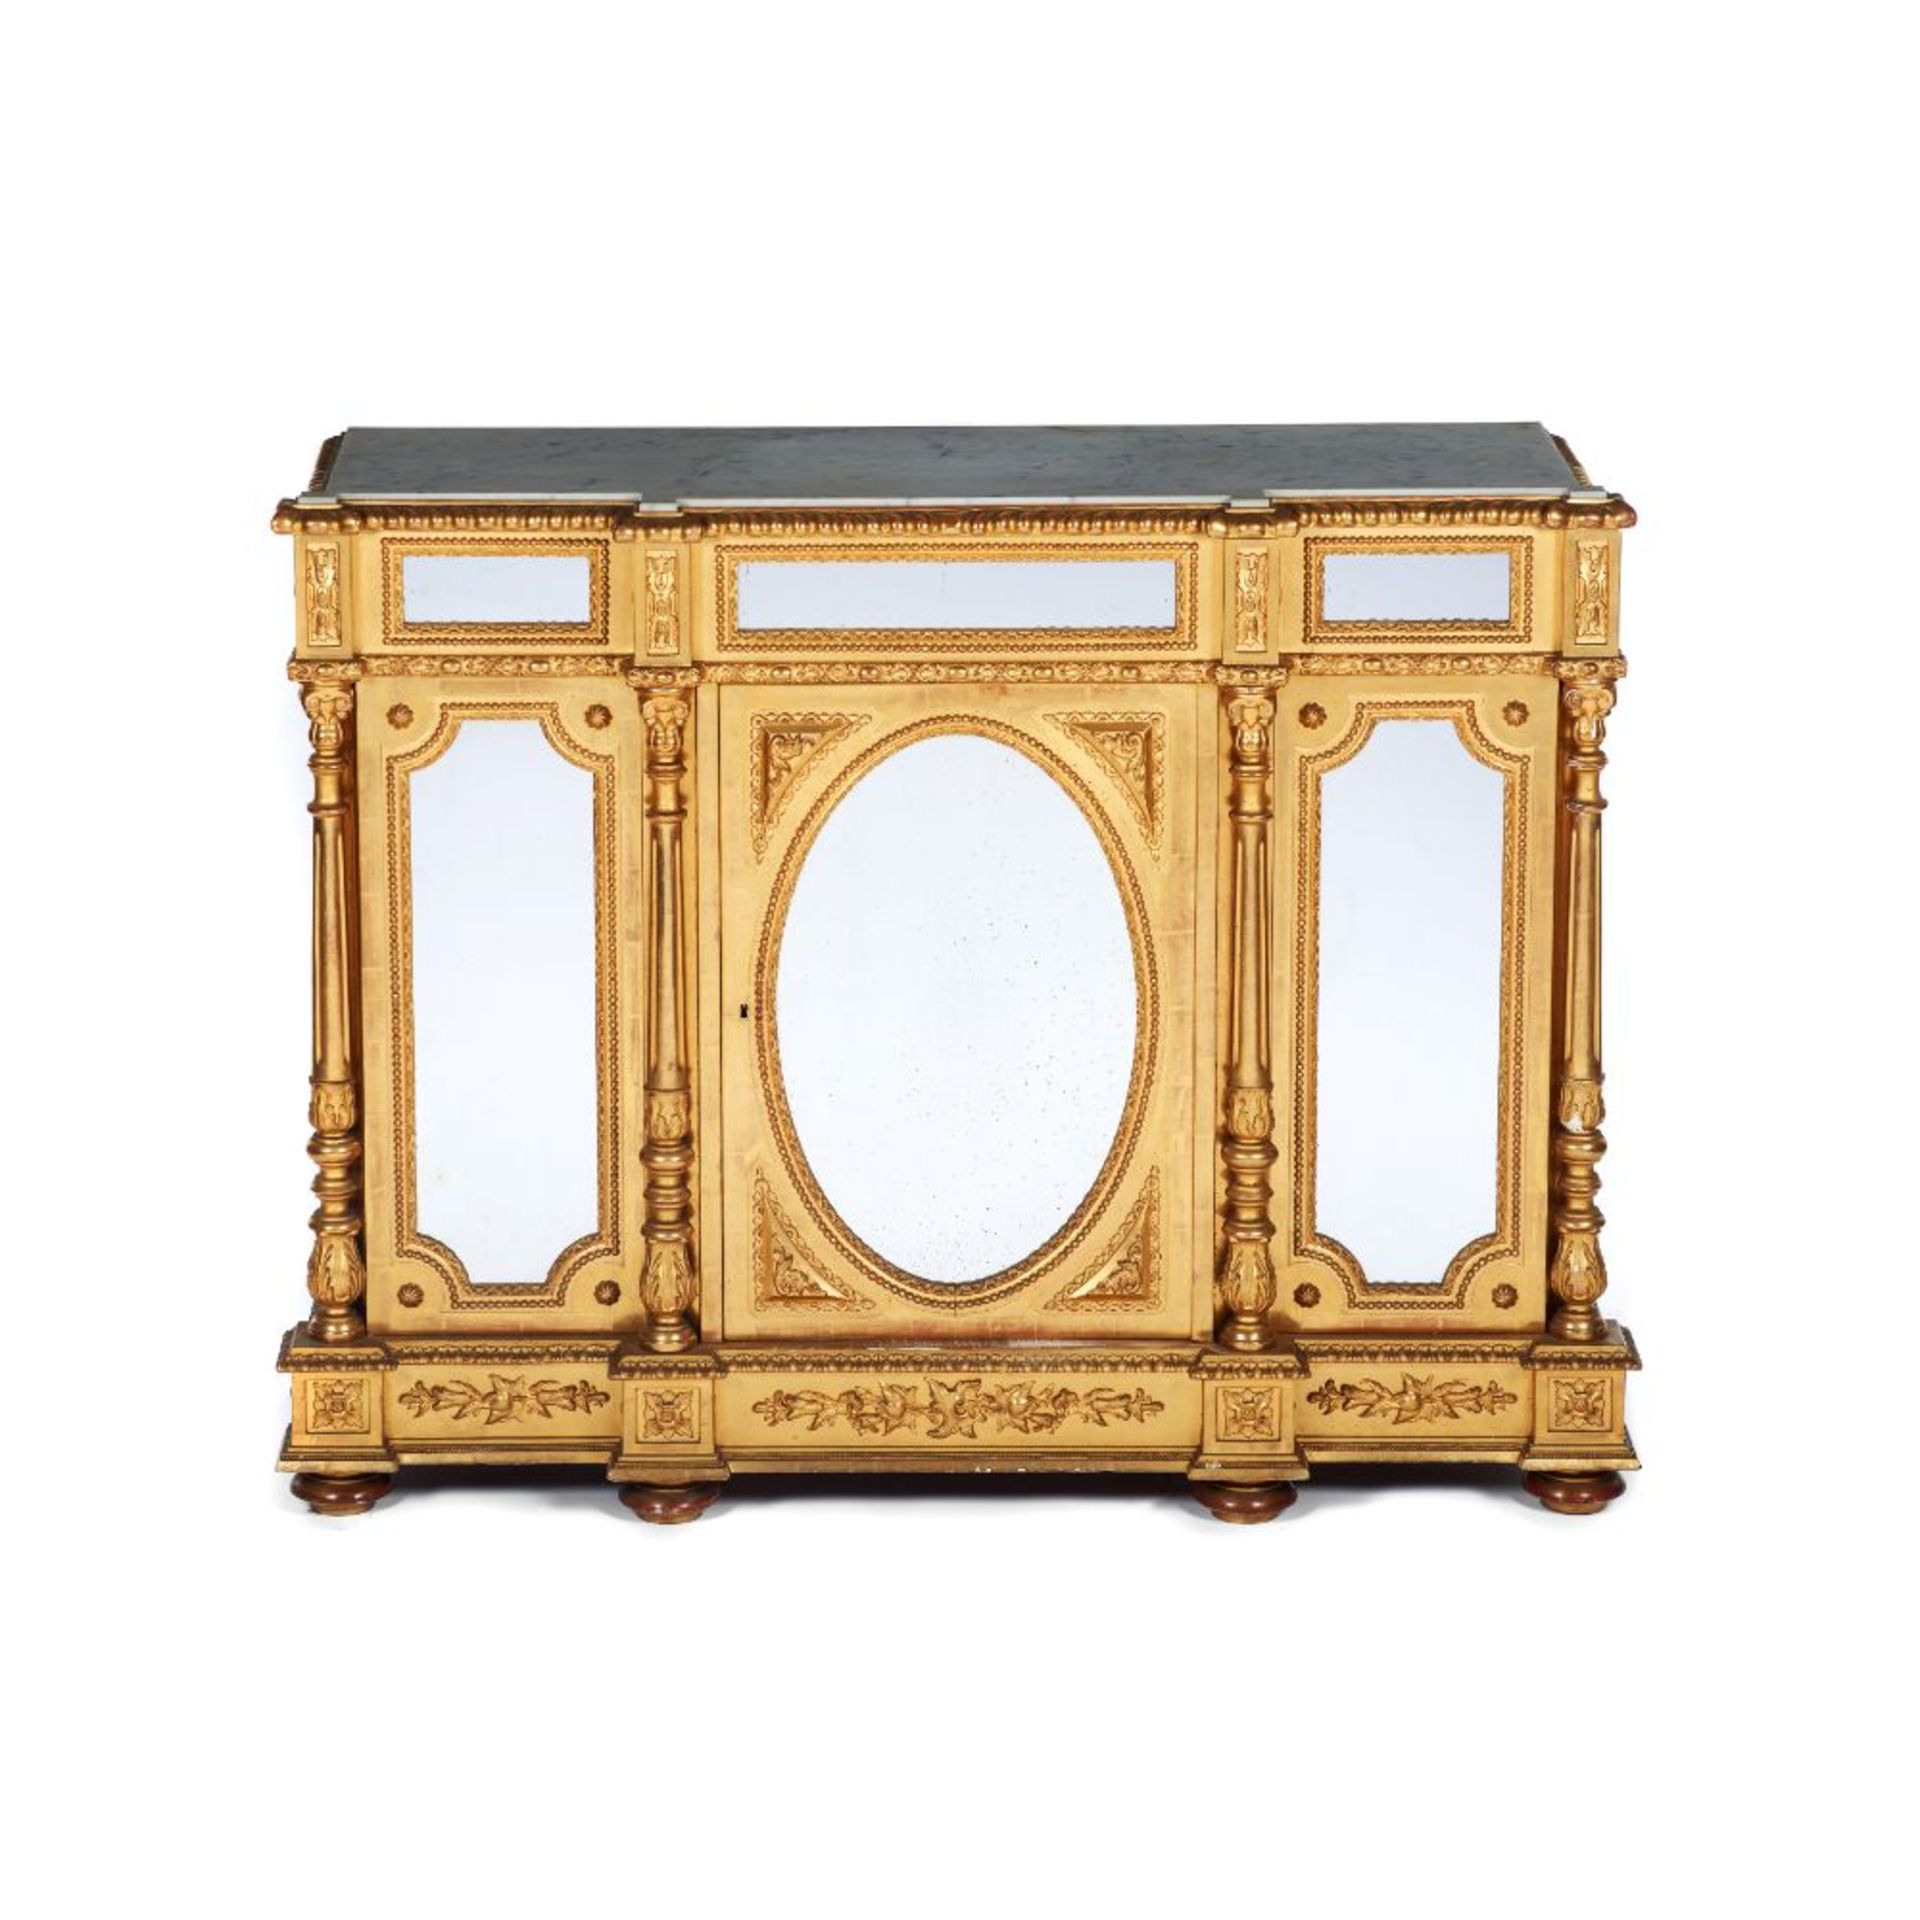 A Napoleon III cabinet, Carved and gilt wood and gesso, Mirrored structure, doors, frontal and - Image 2 of 2